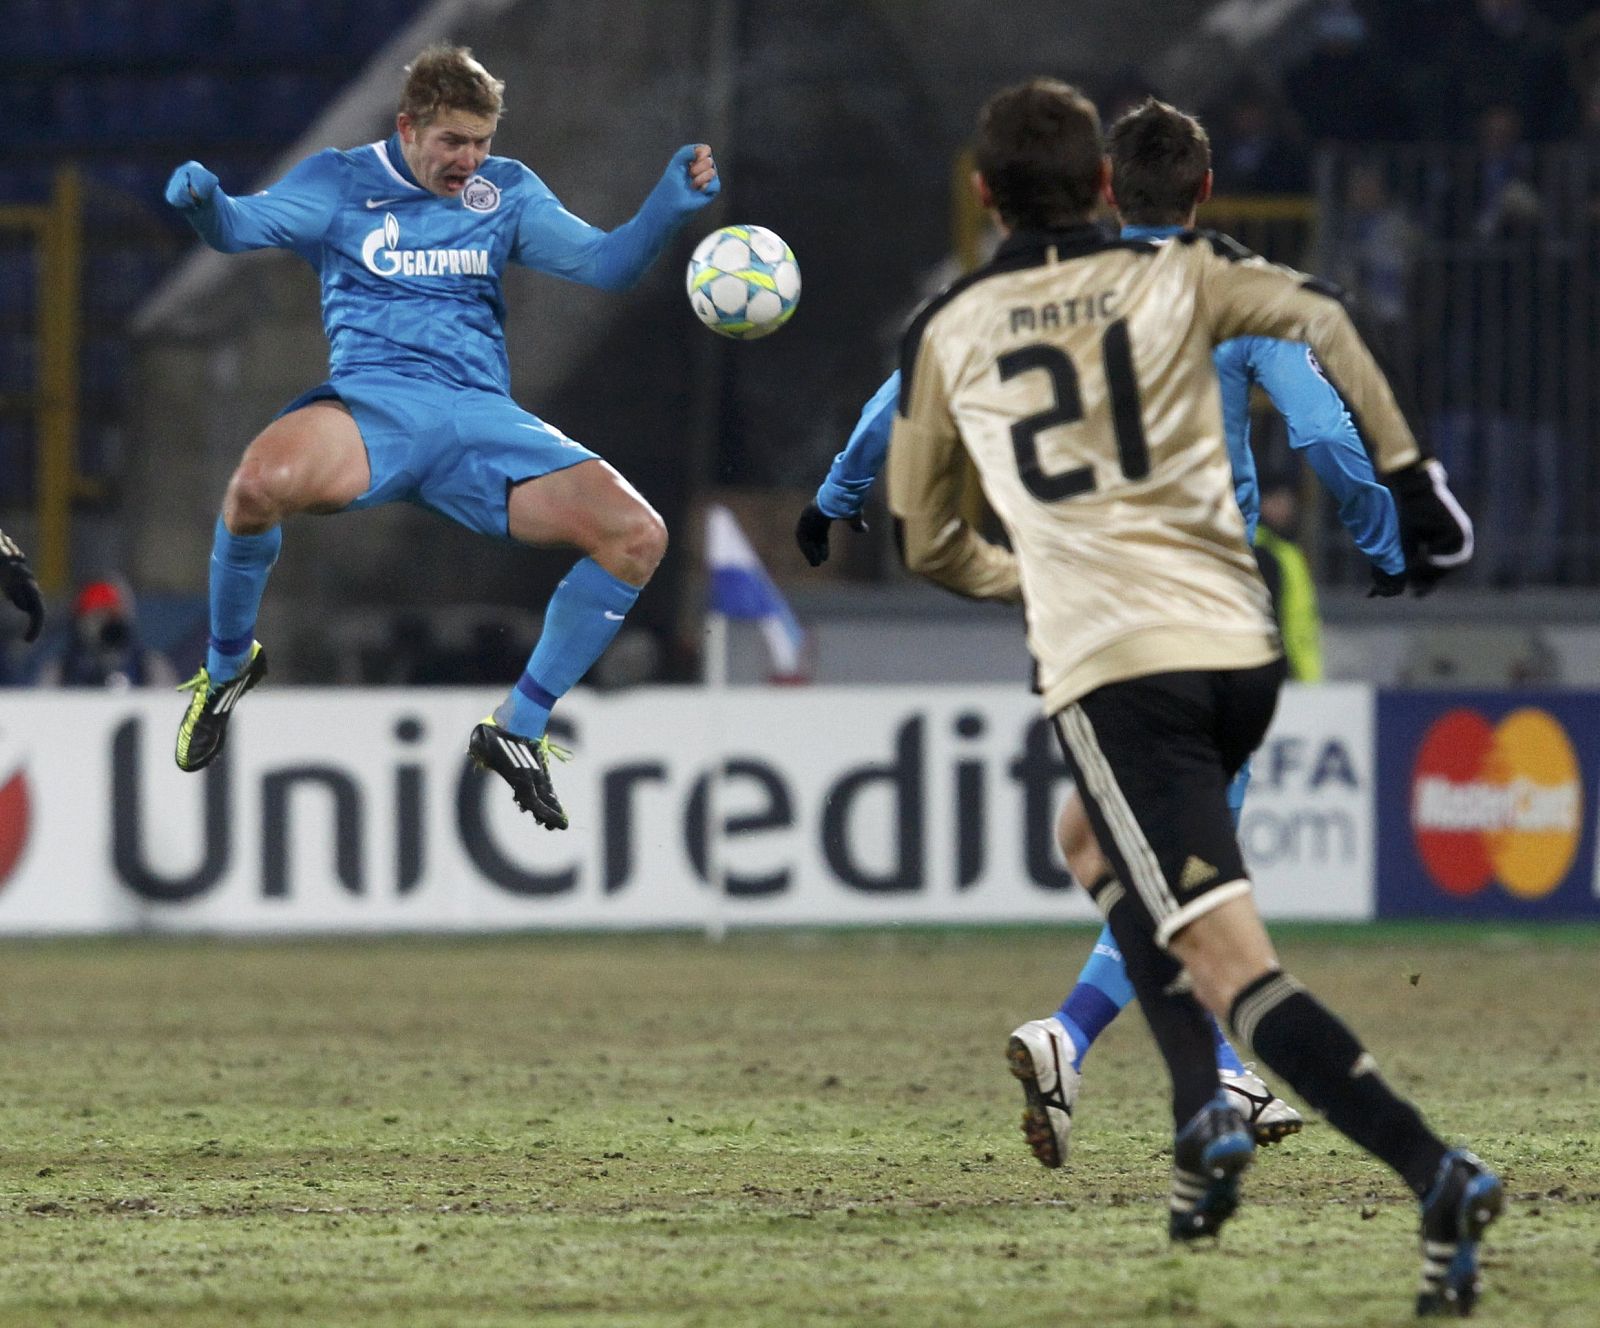 Zenit St. Petersburg's Hubocan jumps to head the ball during their Champions League last 16 first leg soccer match against Benfica at the Petrovsky stadium in St. Petersburg